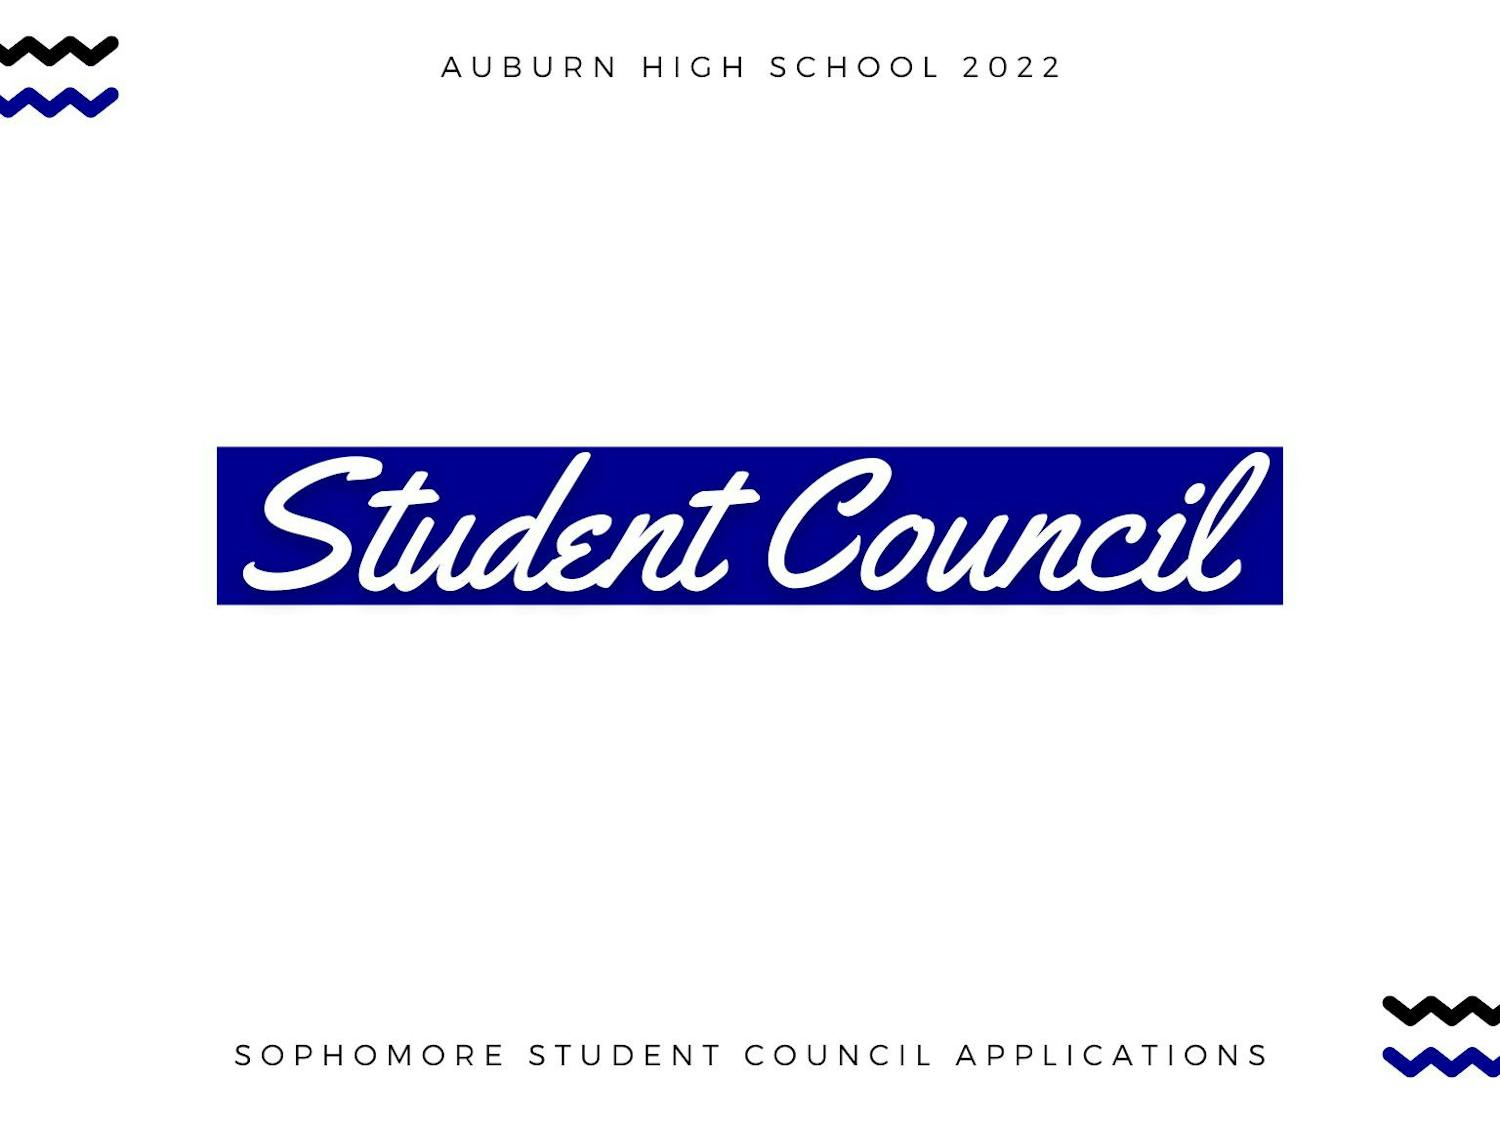 2022 Sophomore Student Council Applications